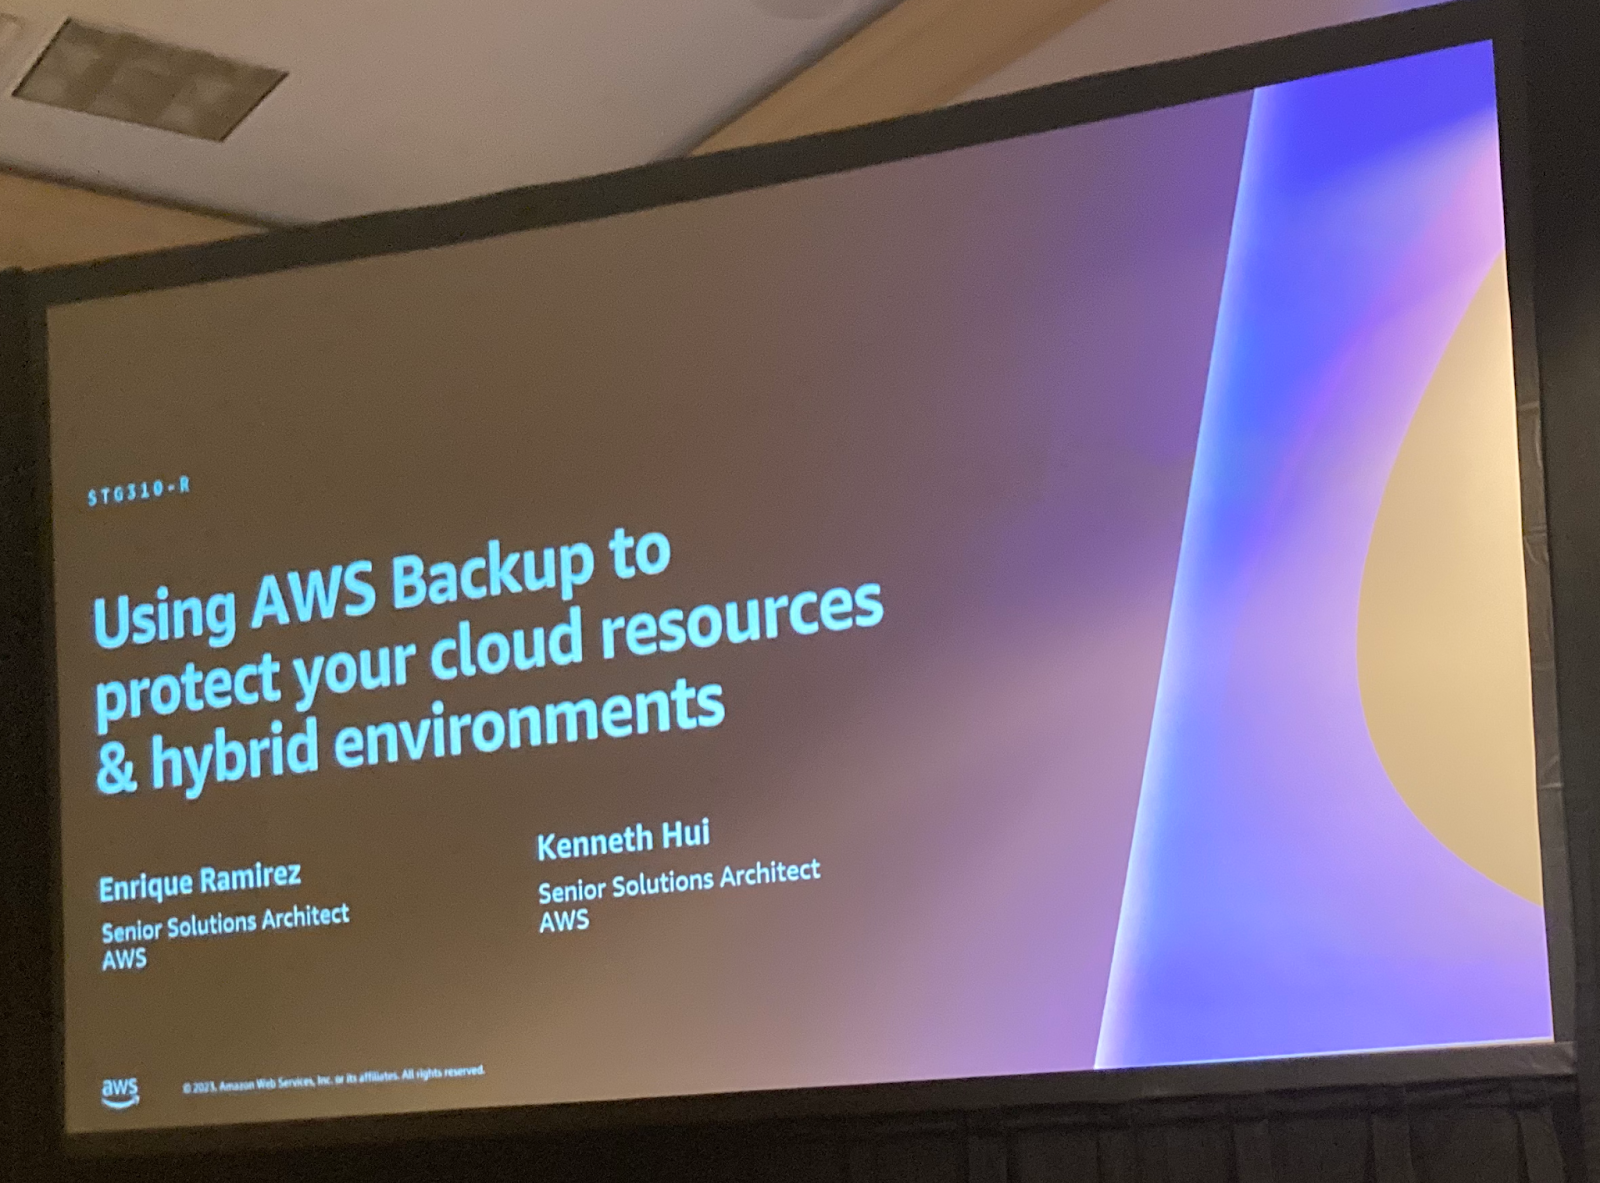 Using AWS Backup to protect your cloud resources & hybrid environment